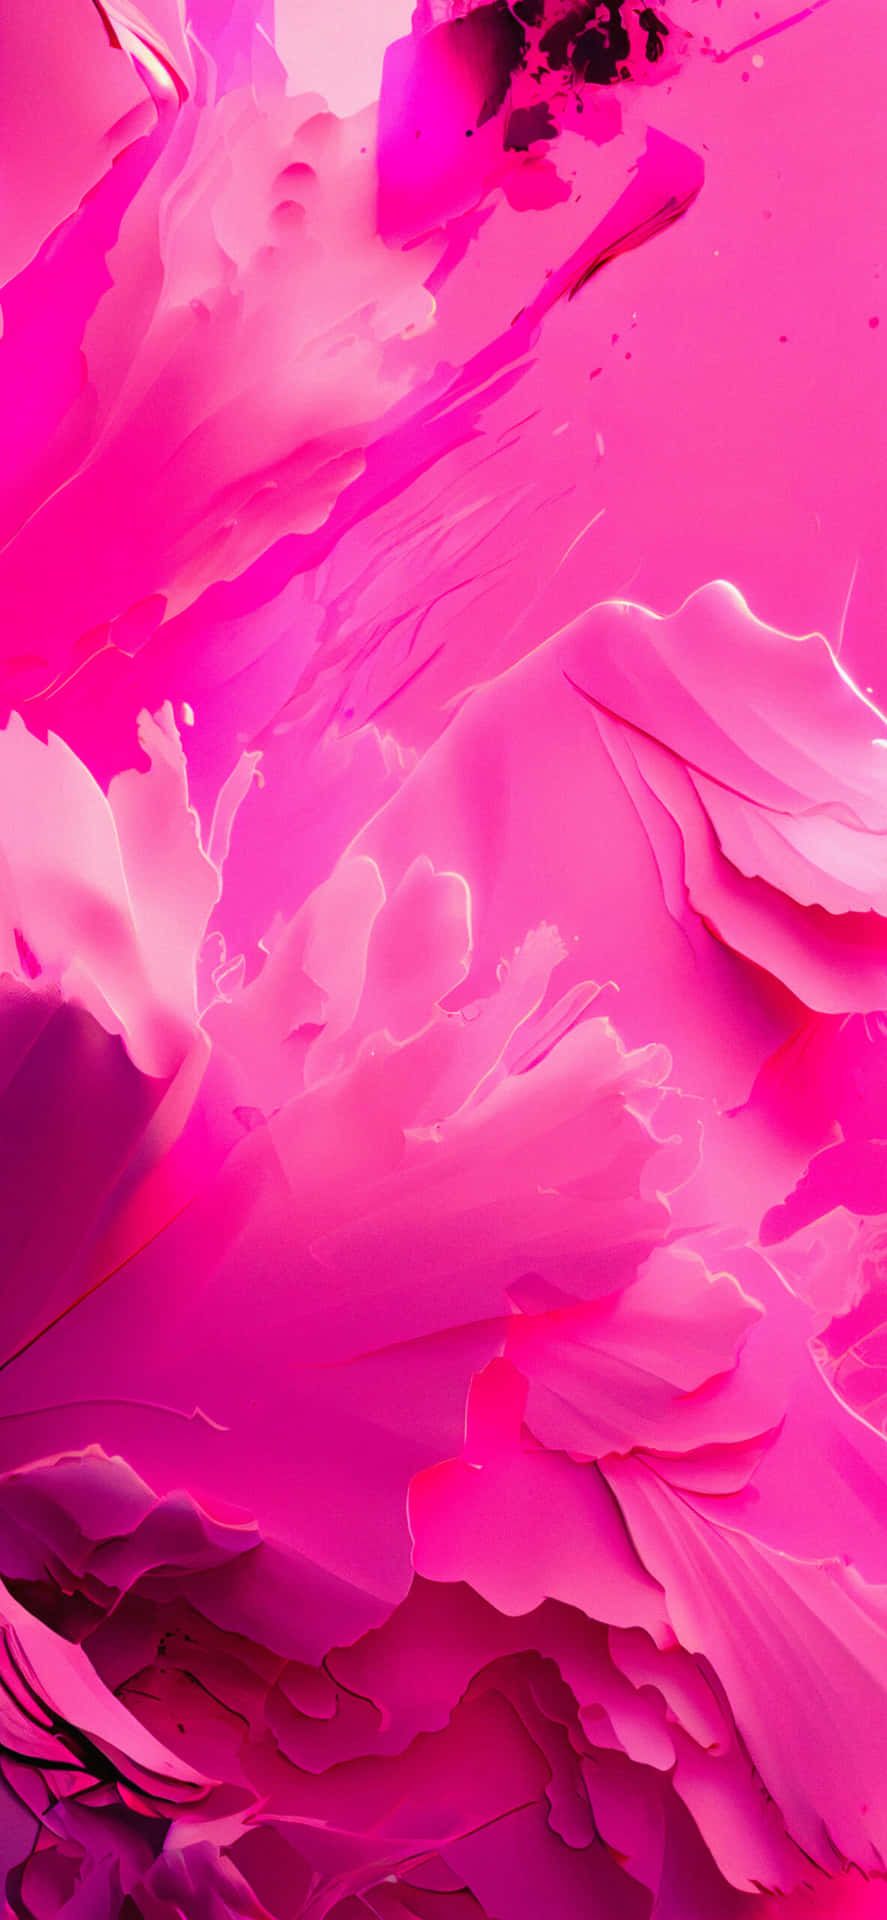 "Love the vibrancy of this Hot Pink Background!"